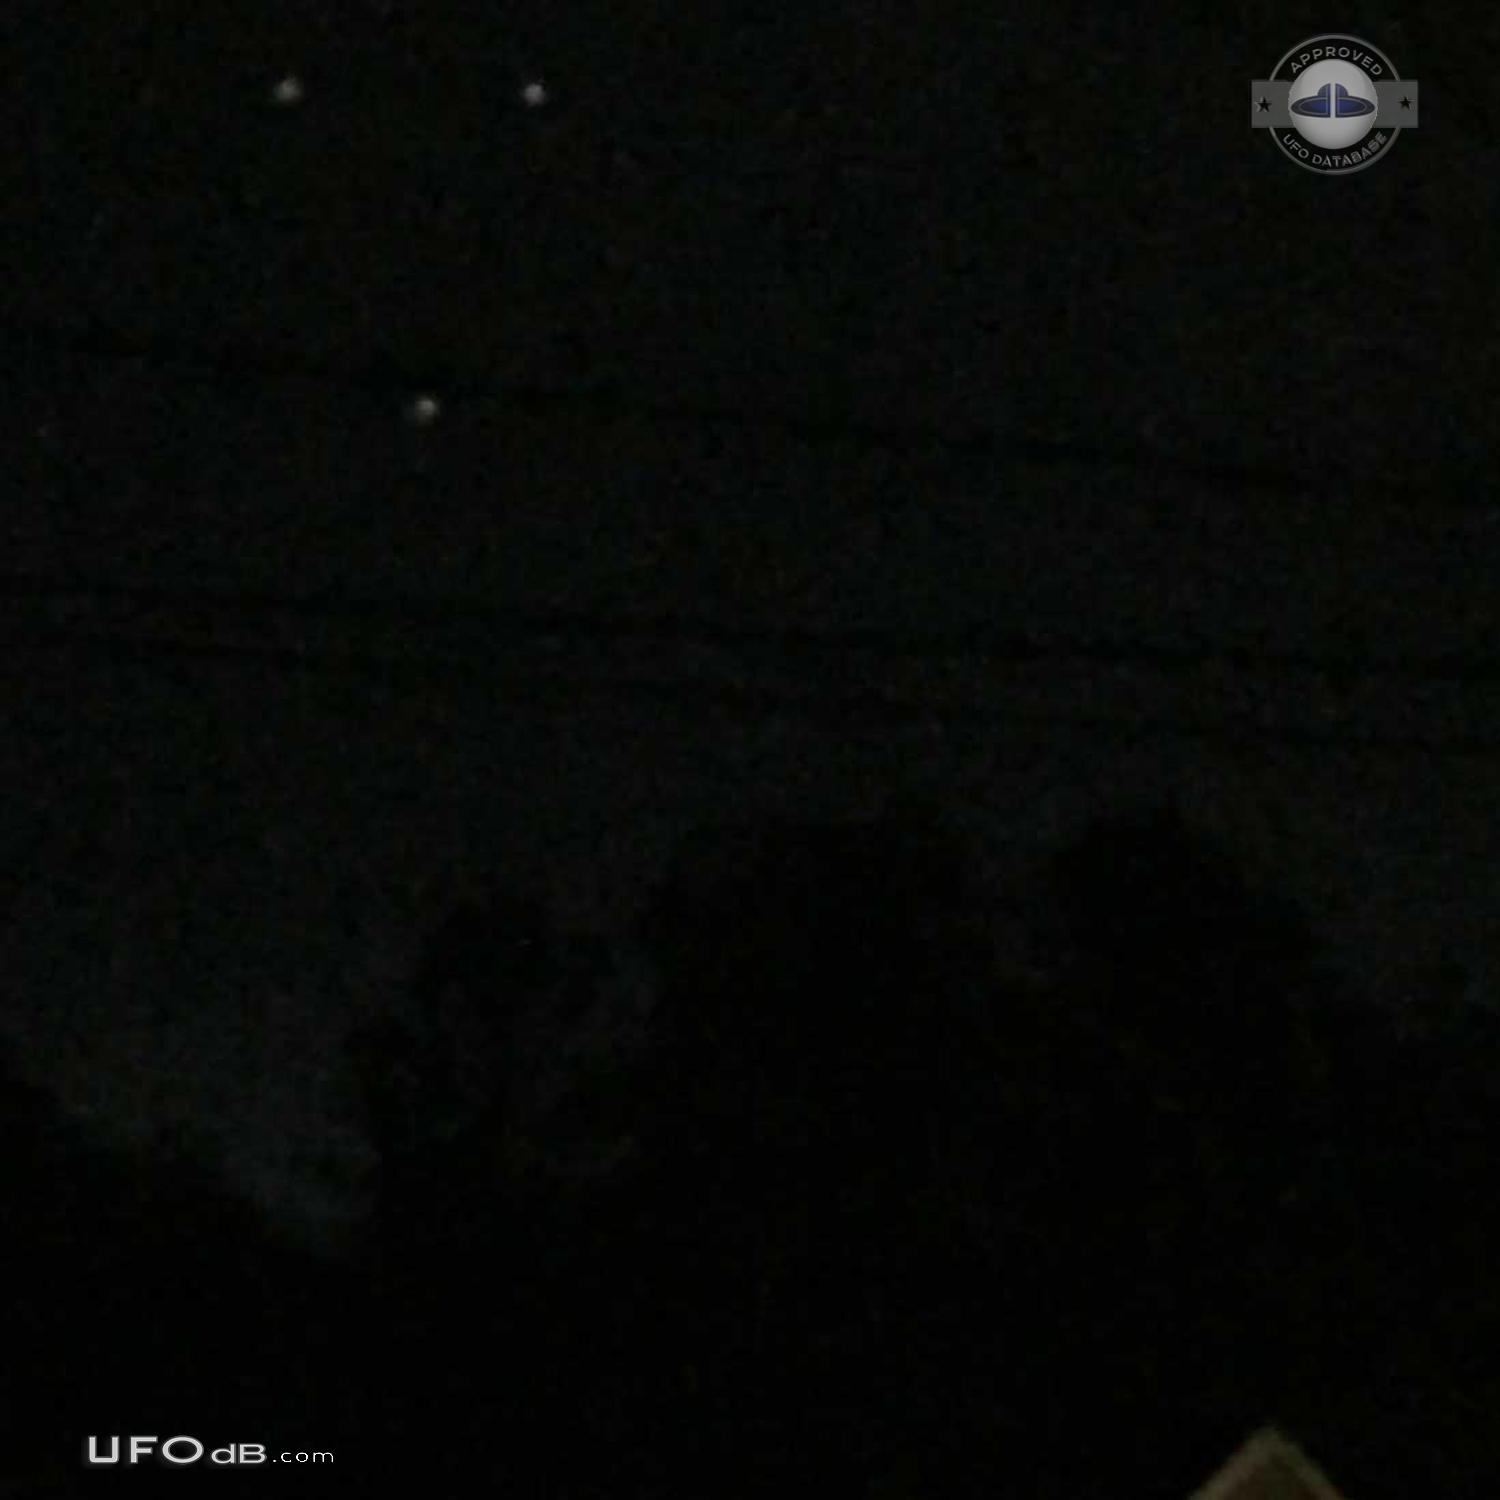 Three slowly moving UFOs in shape of inverted triangle Alabama 2016 UFO Picture #774-4